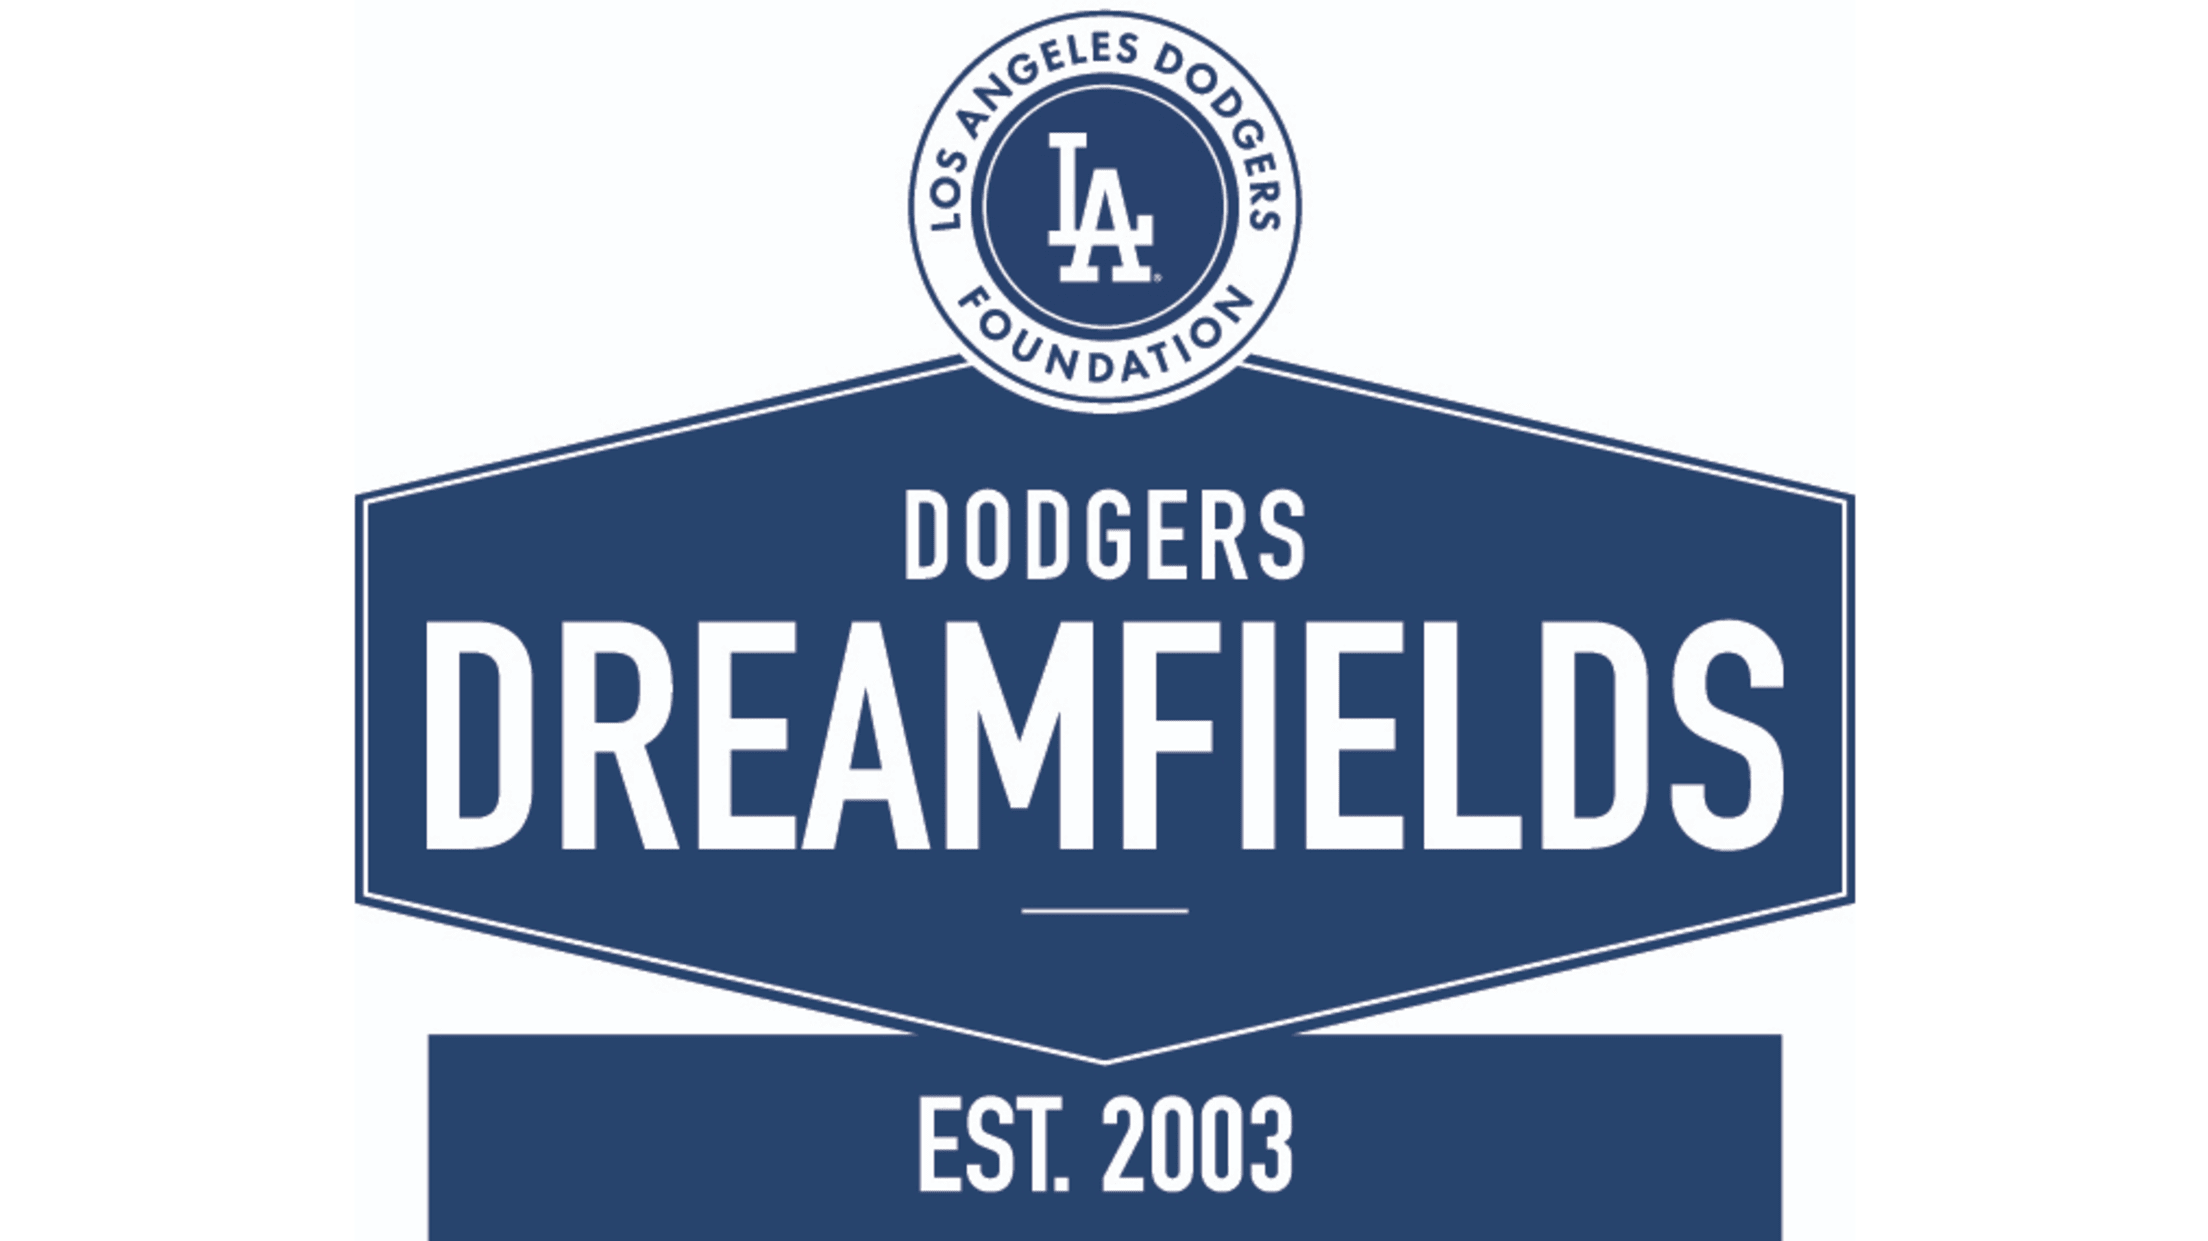 Los Angeles Dodgers Foundation on Instagram: Last chance! Bid now on  autographed @dodgers memorabilia, experiences and more! Net proceeds  benefit our #DodgersDreamteam program to provide basic needs, education,  and health resources to